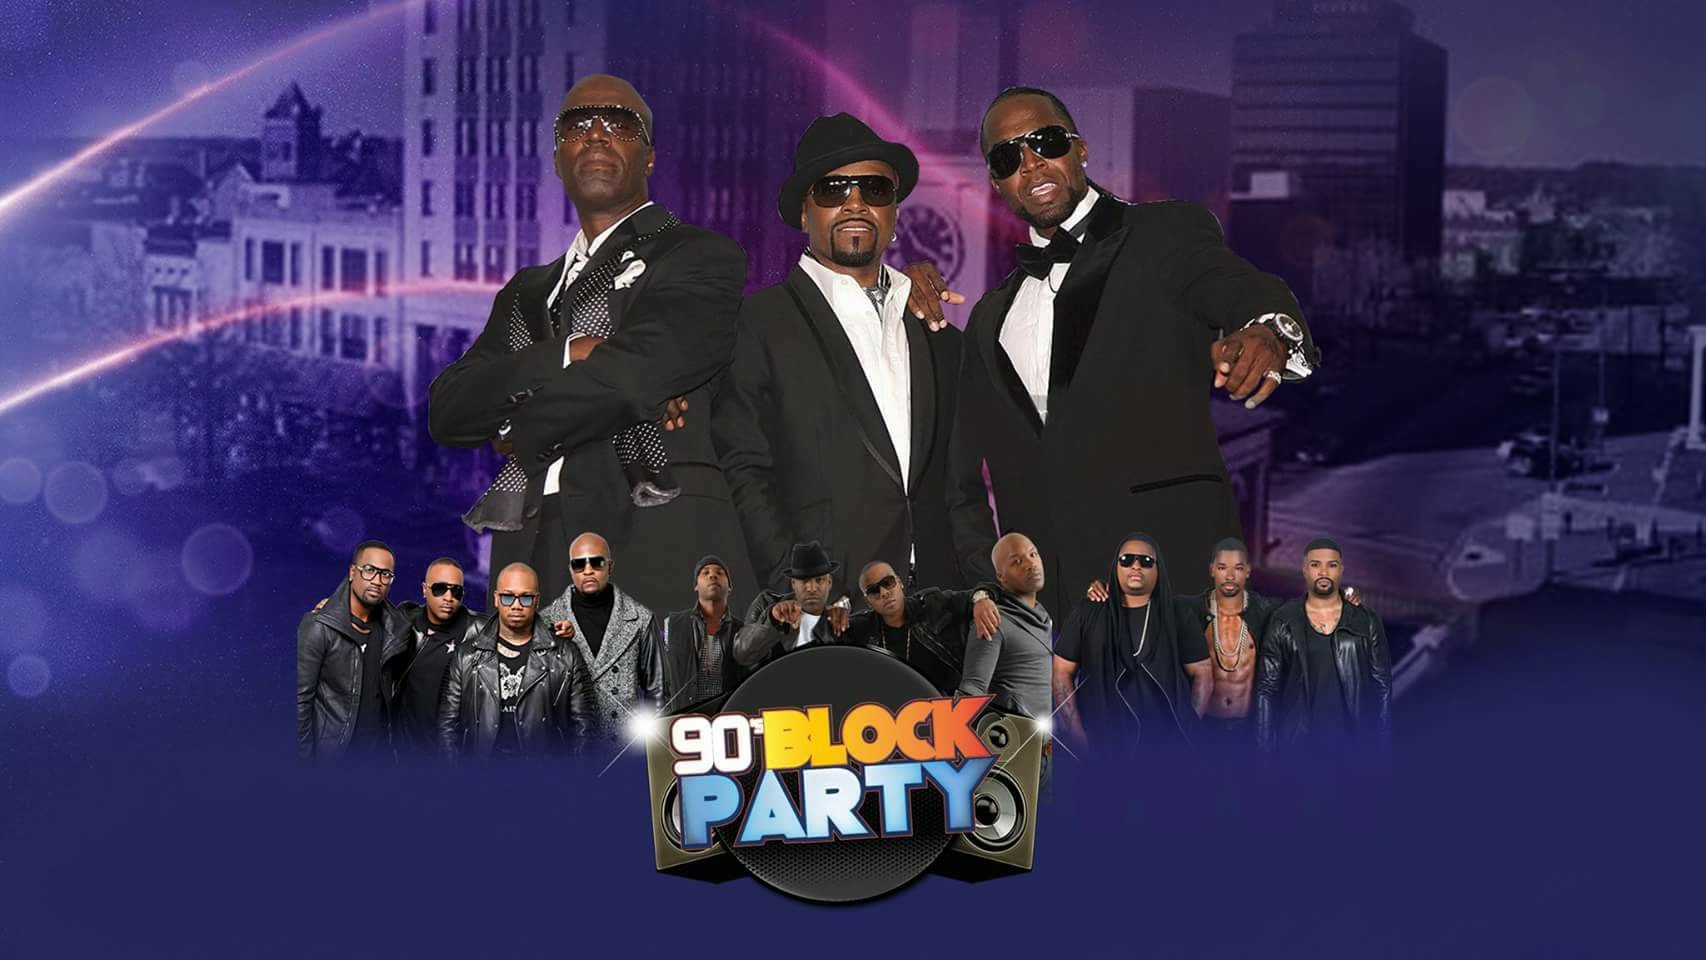 Happy Mother’s Day! The 90’s Block Party Will Be Live At The Forum May 13th Feat. Guy, Ginuwine, Next, And Many More.